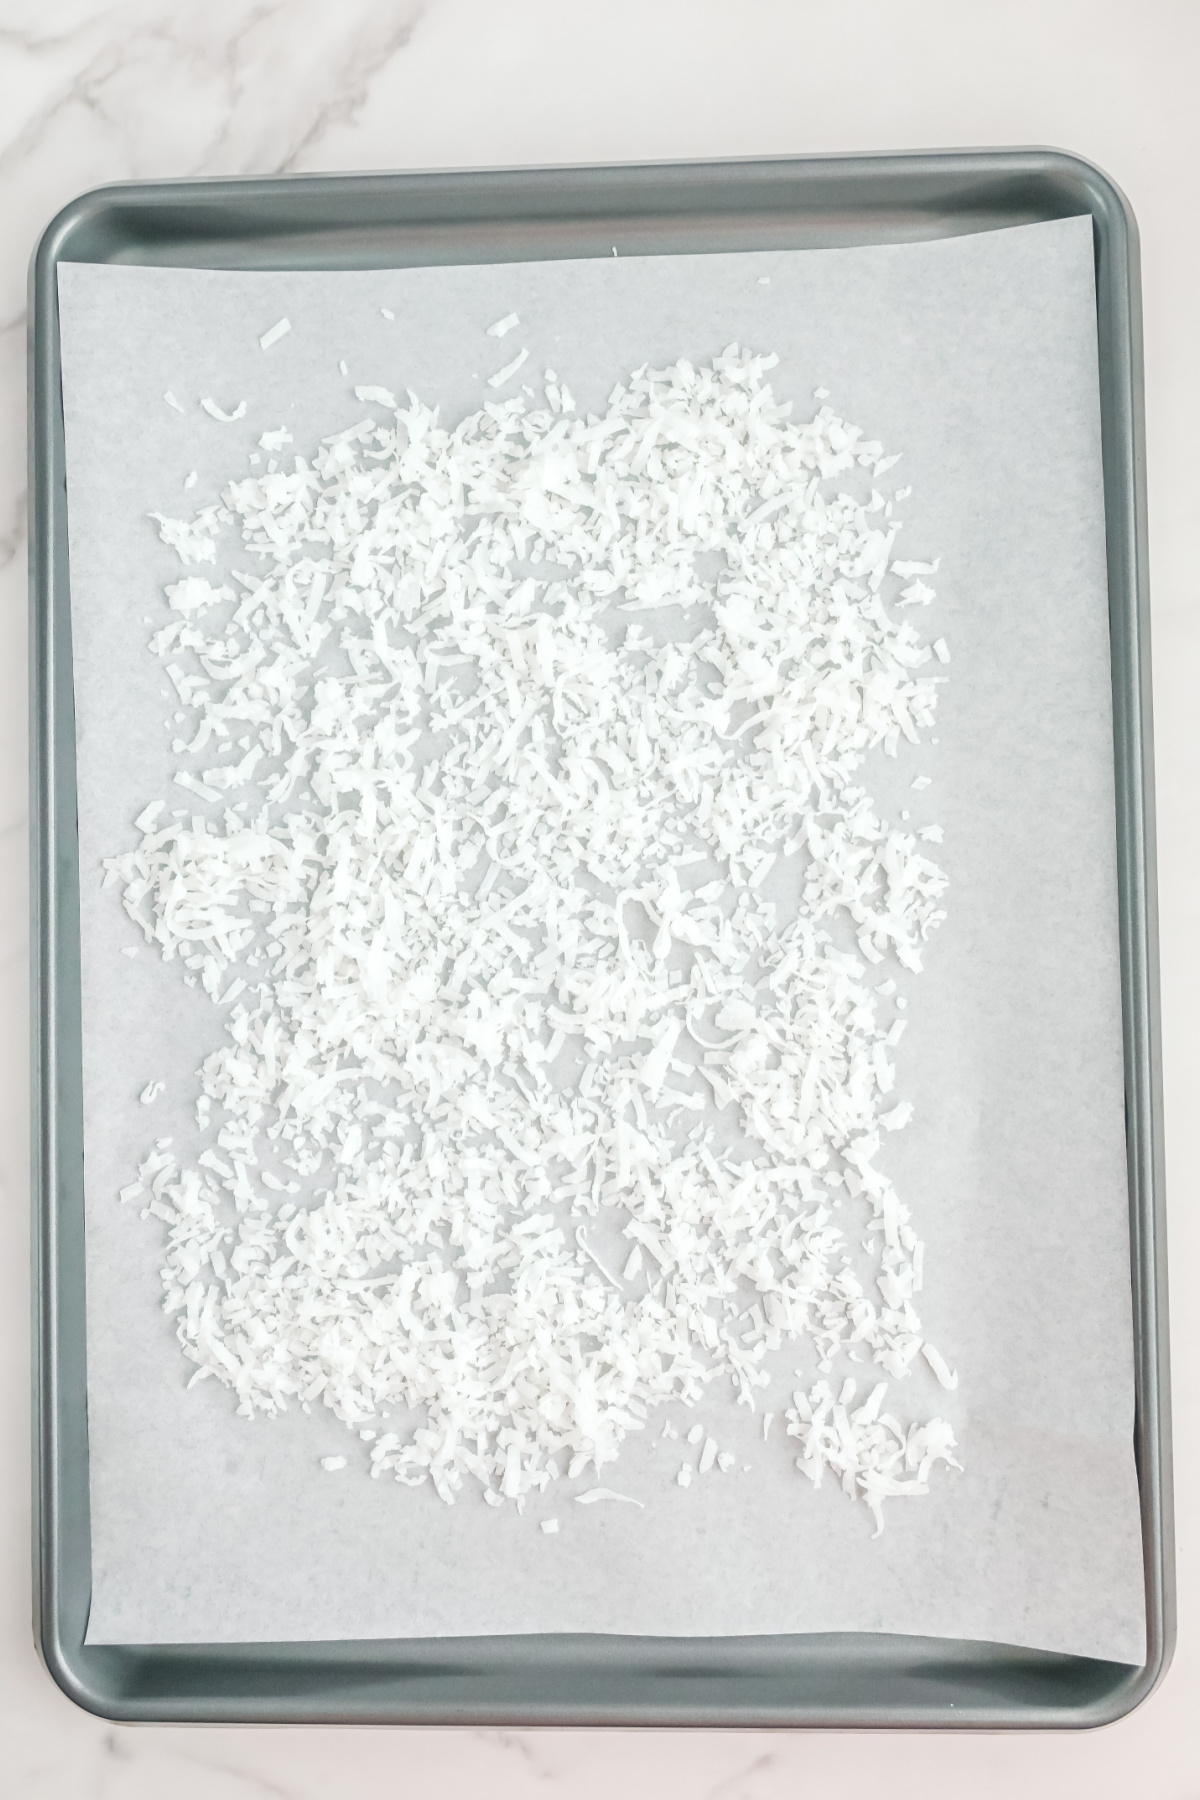 Coconut flakes on a baking sheet.